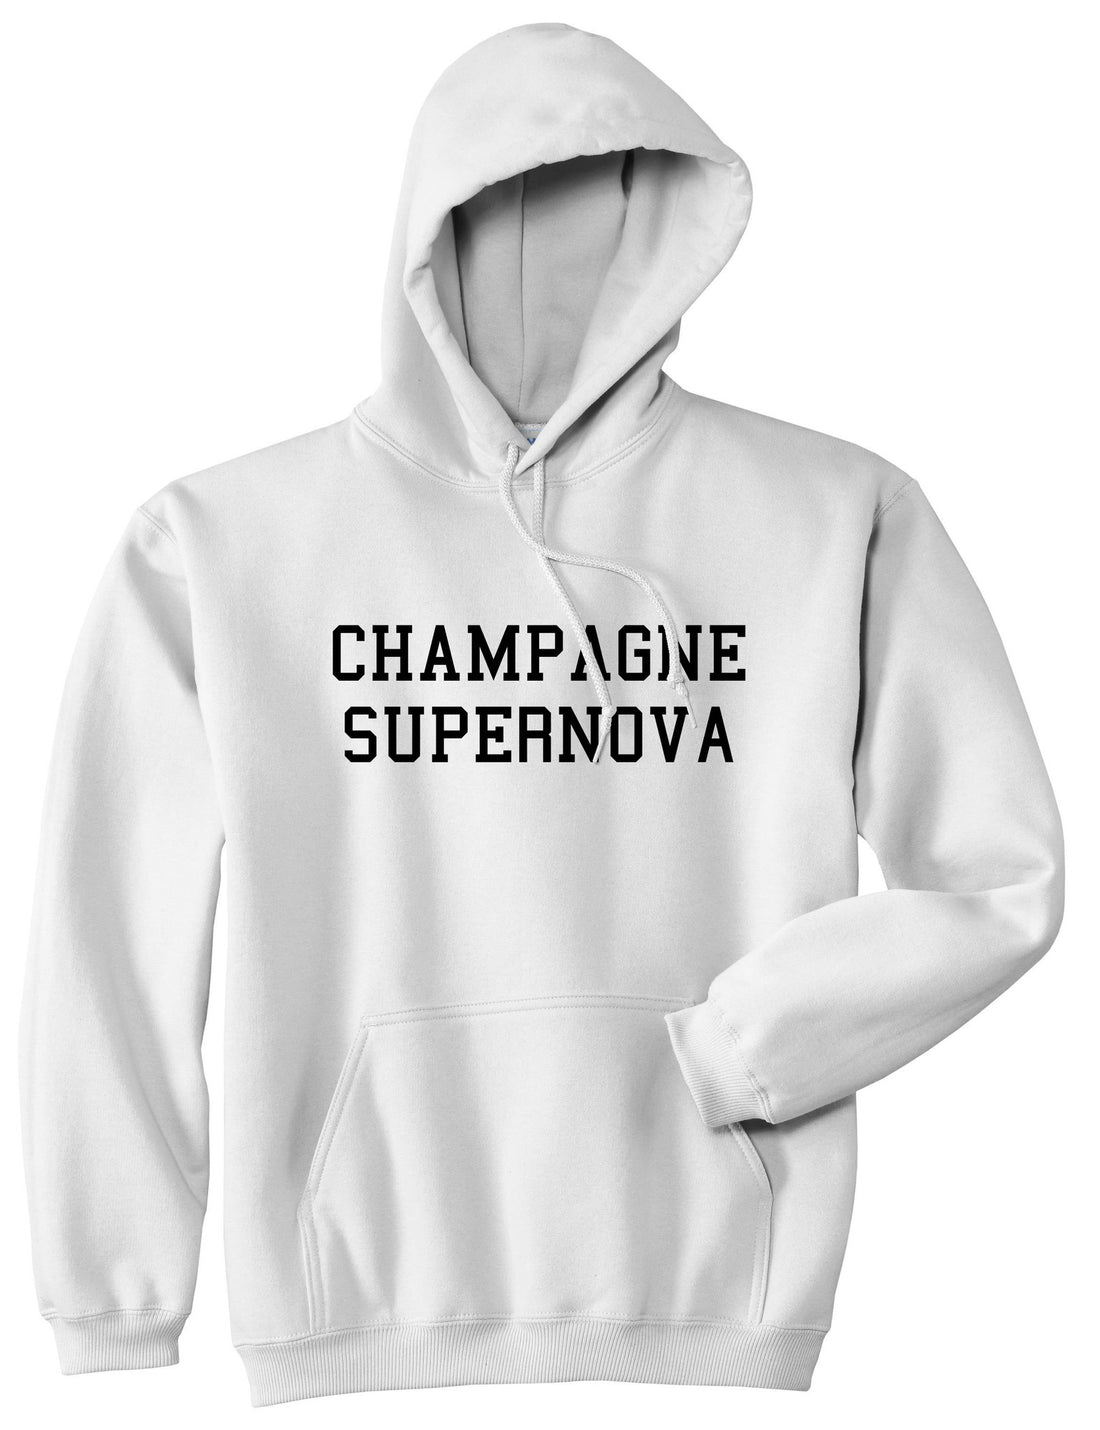 Champagne Supernova Pullover Hoodie Hoody in White by Kings Of NY